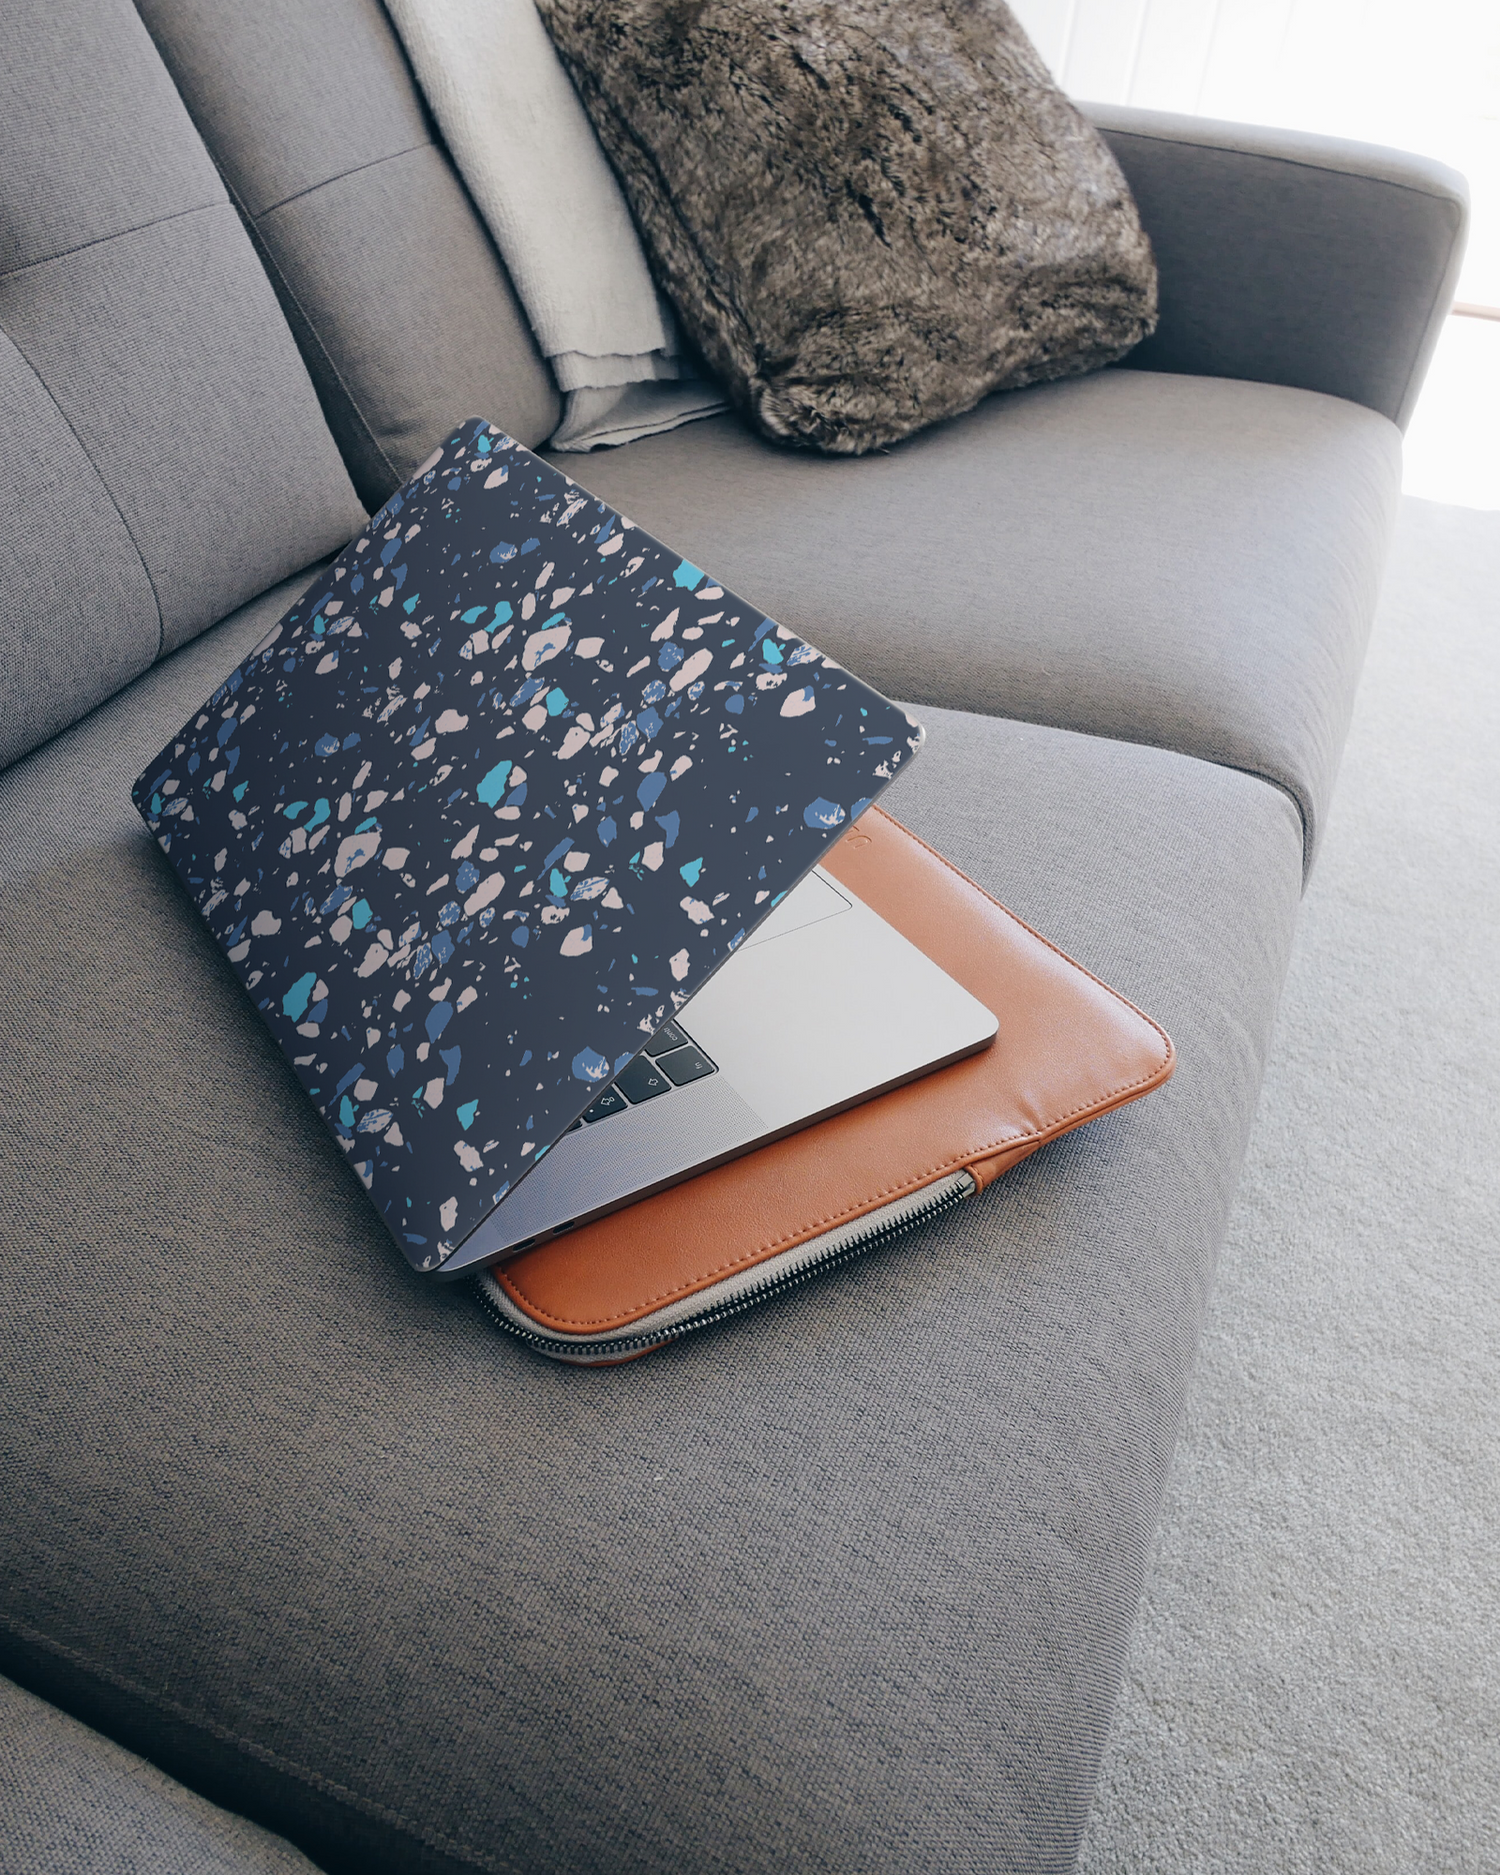 Speckled Marble Laptop Skin for 15 inch Apple MacBooks on a couch